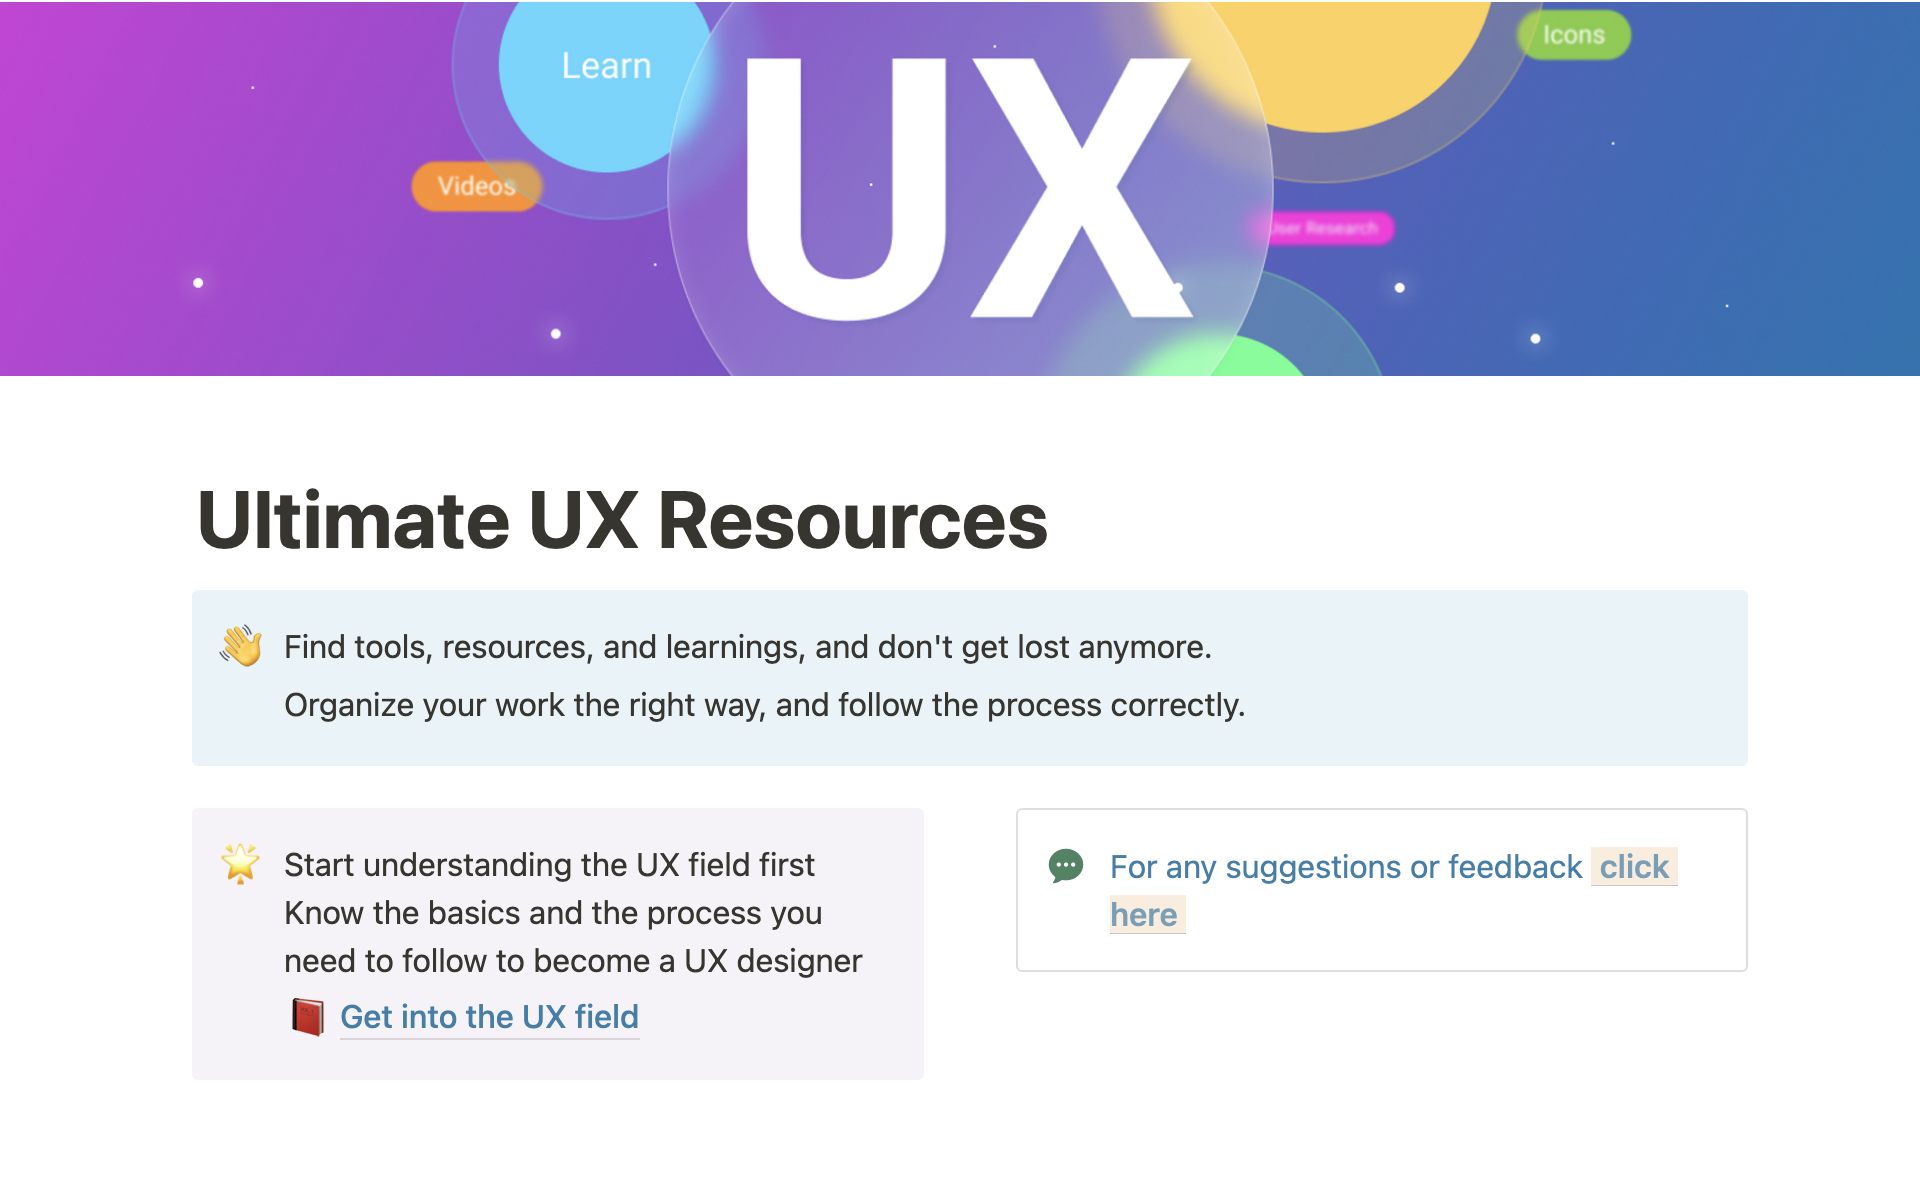 Find UX tools, resources, and learnings, and don't get lost anymore.